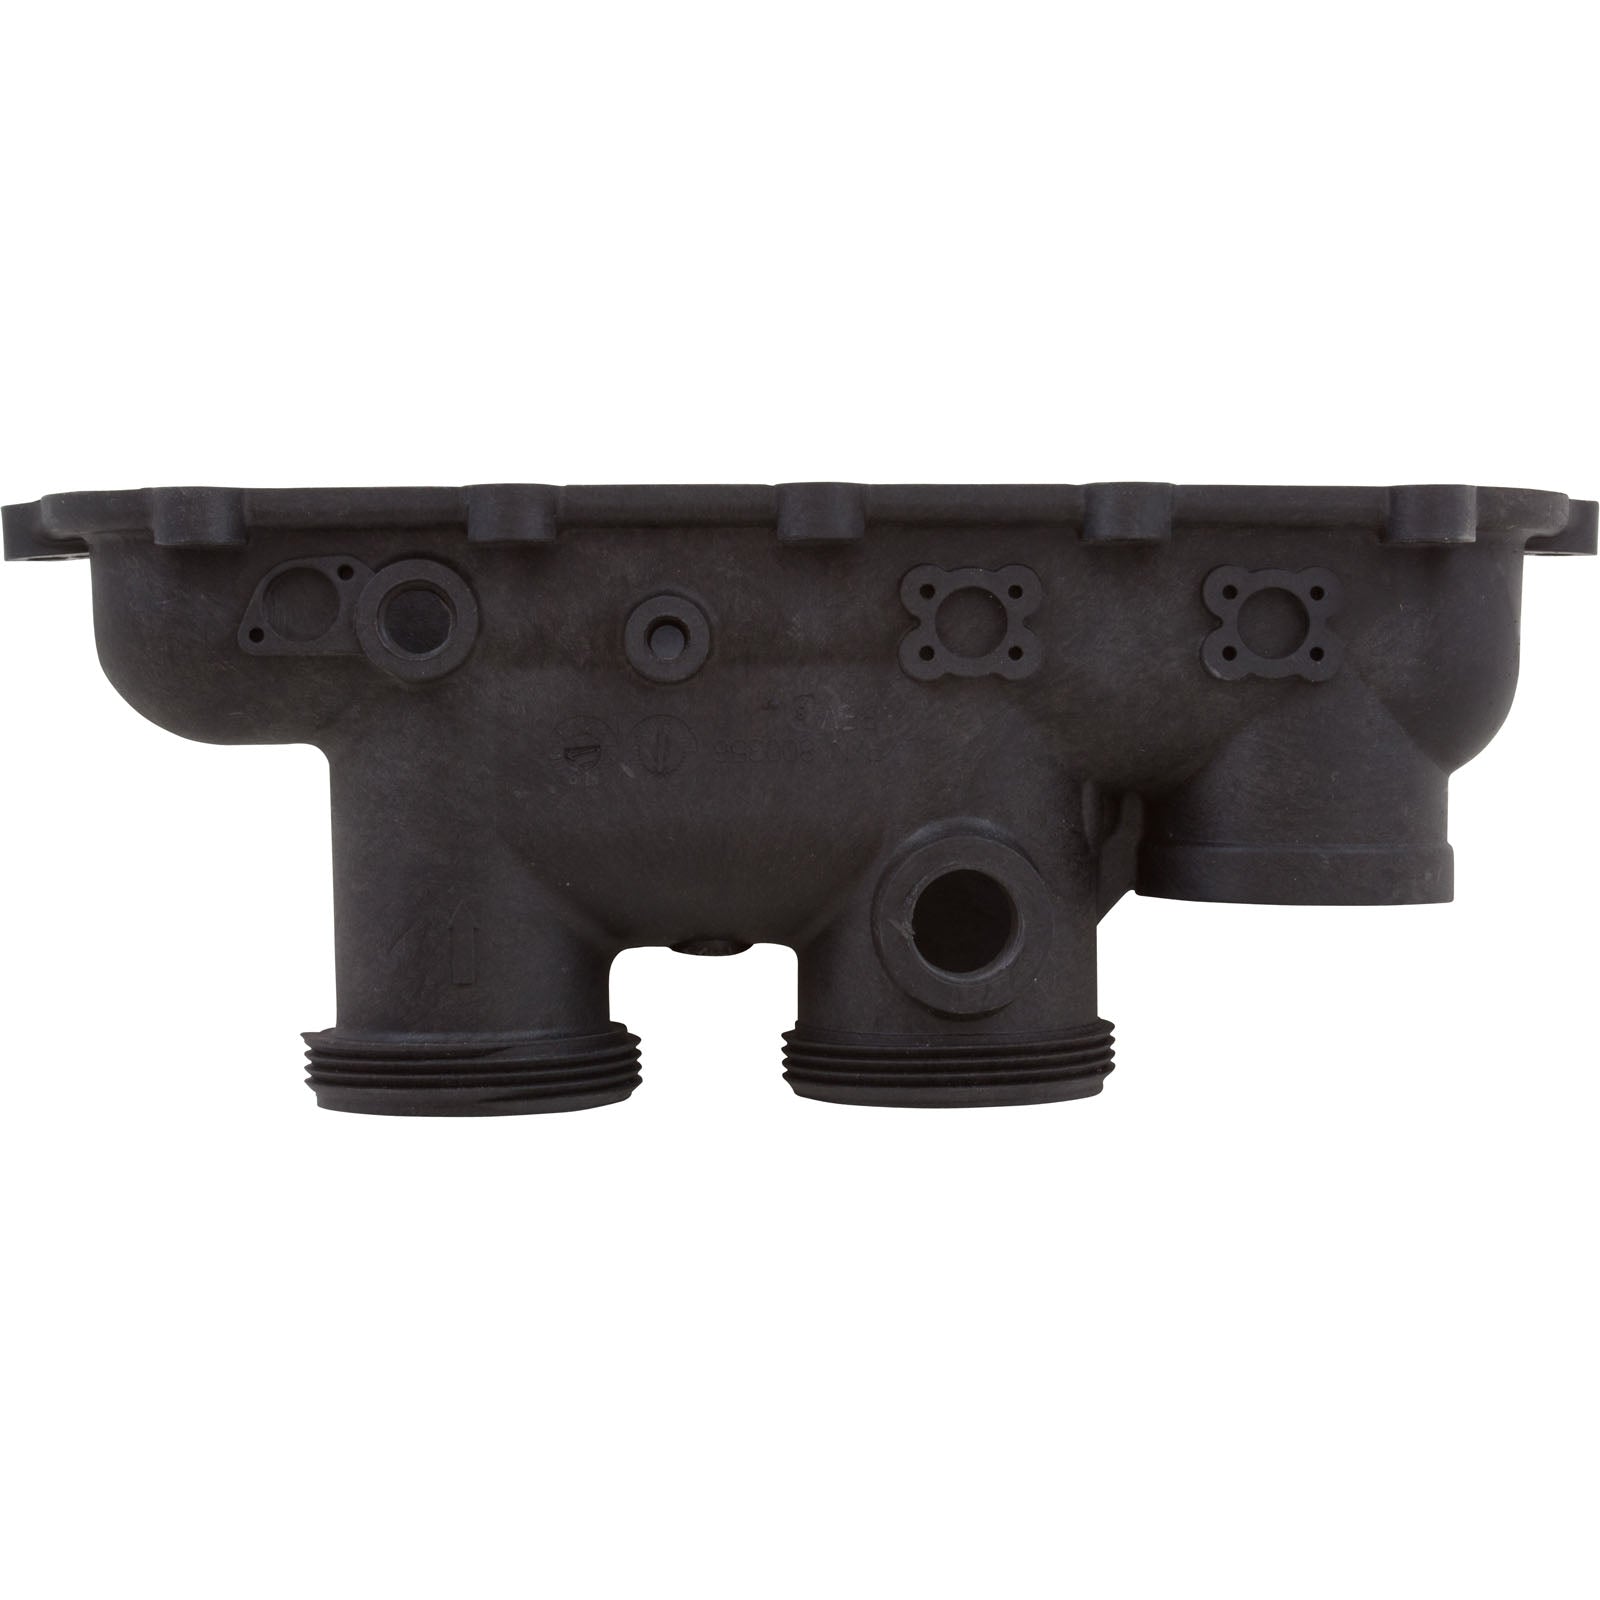 Raypak 006706F Inlet/Outlet Header For Model R185A, R265A, R335A Pool Heater With Gasket